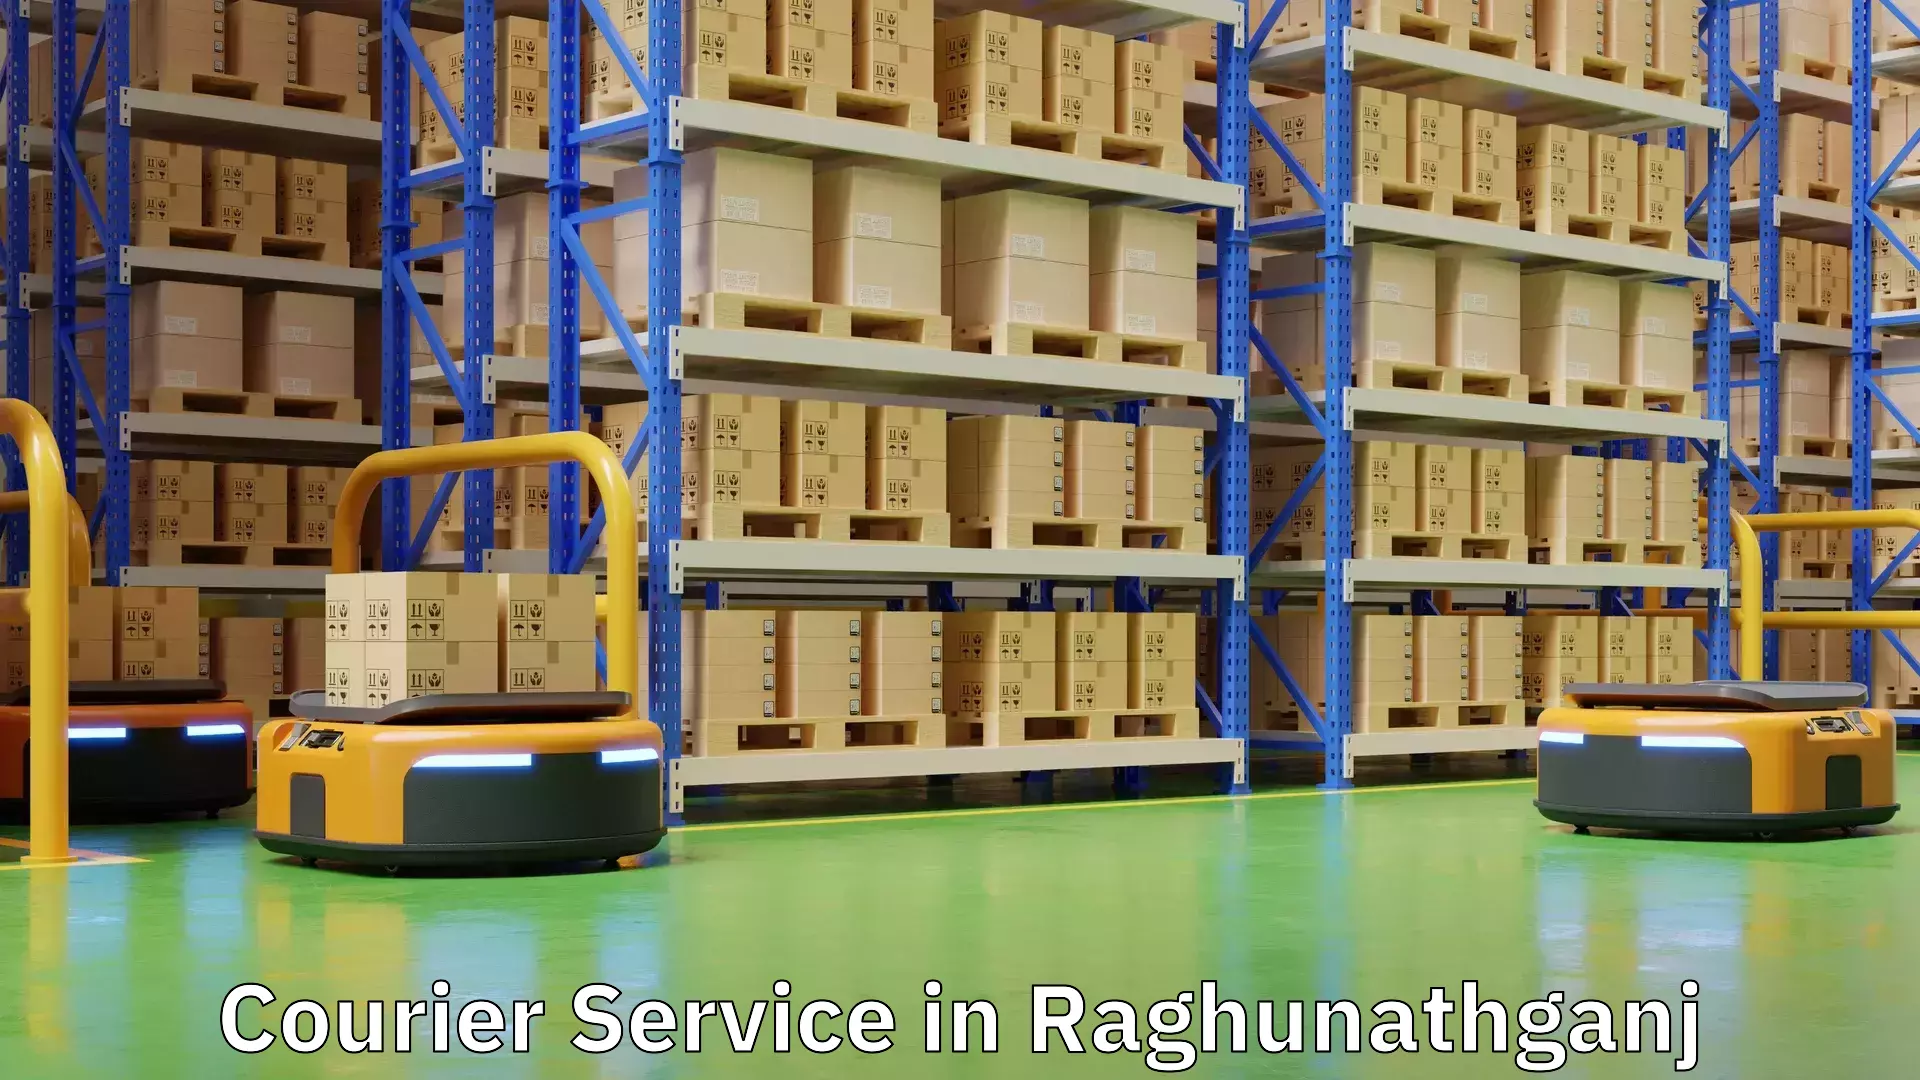 Streamlined delivery processes in Raghunathganj